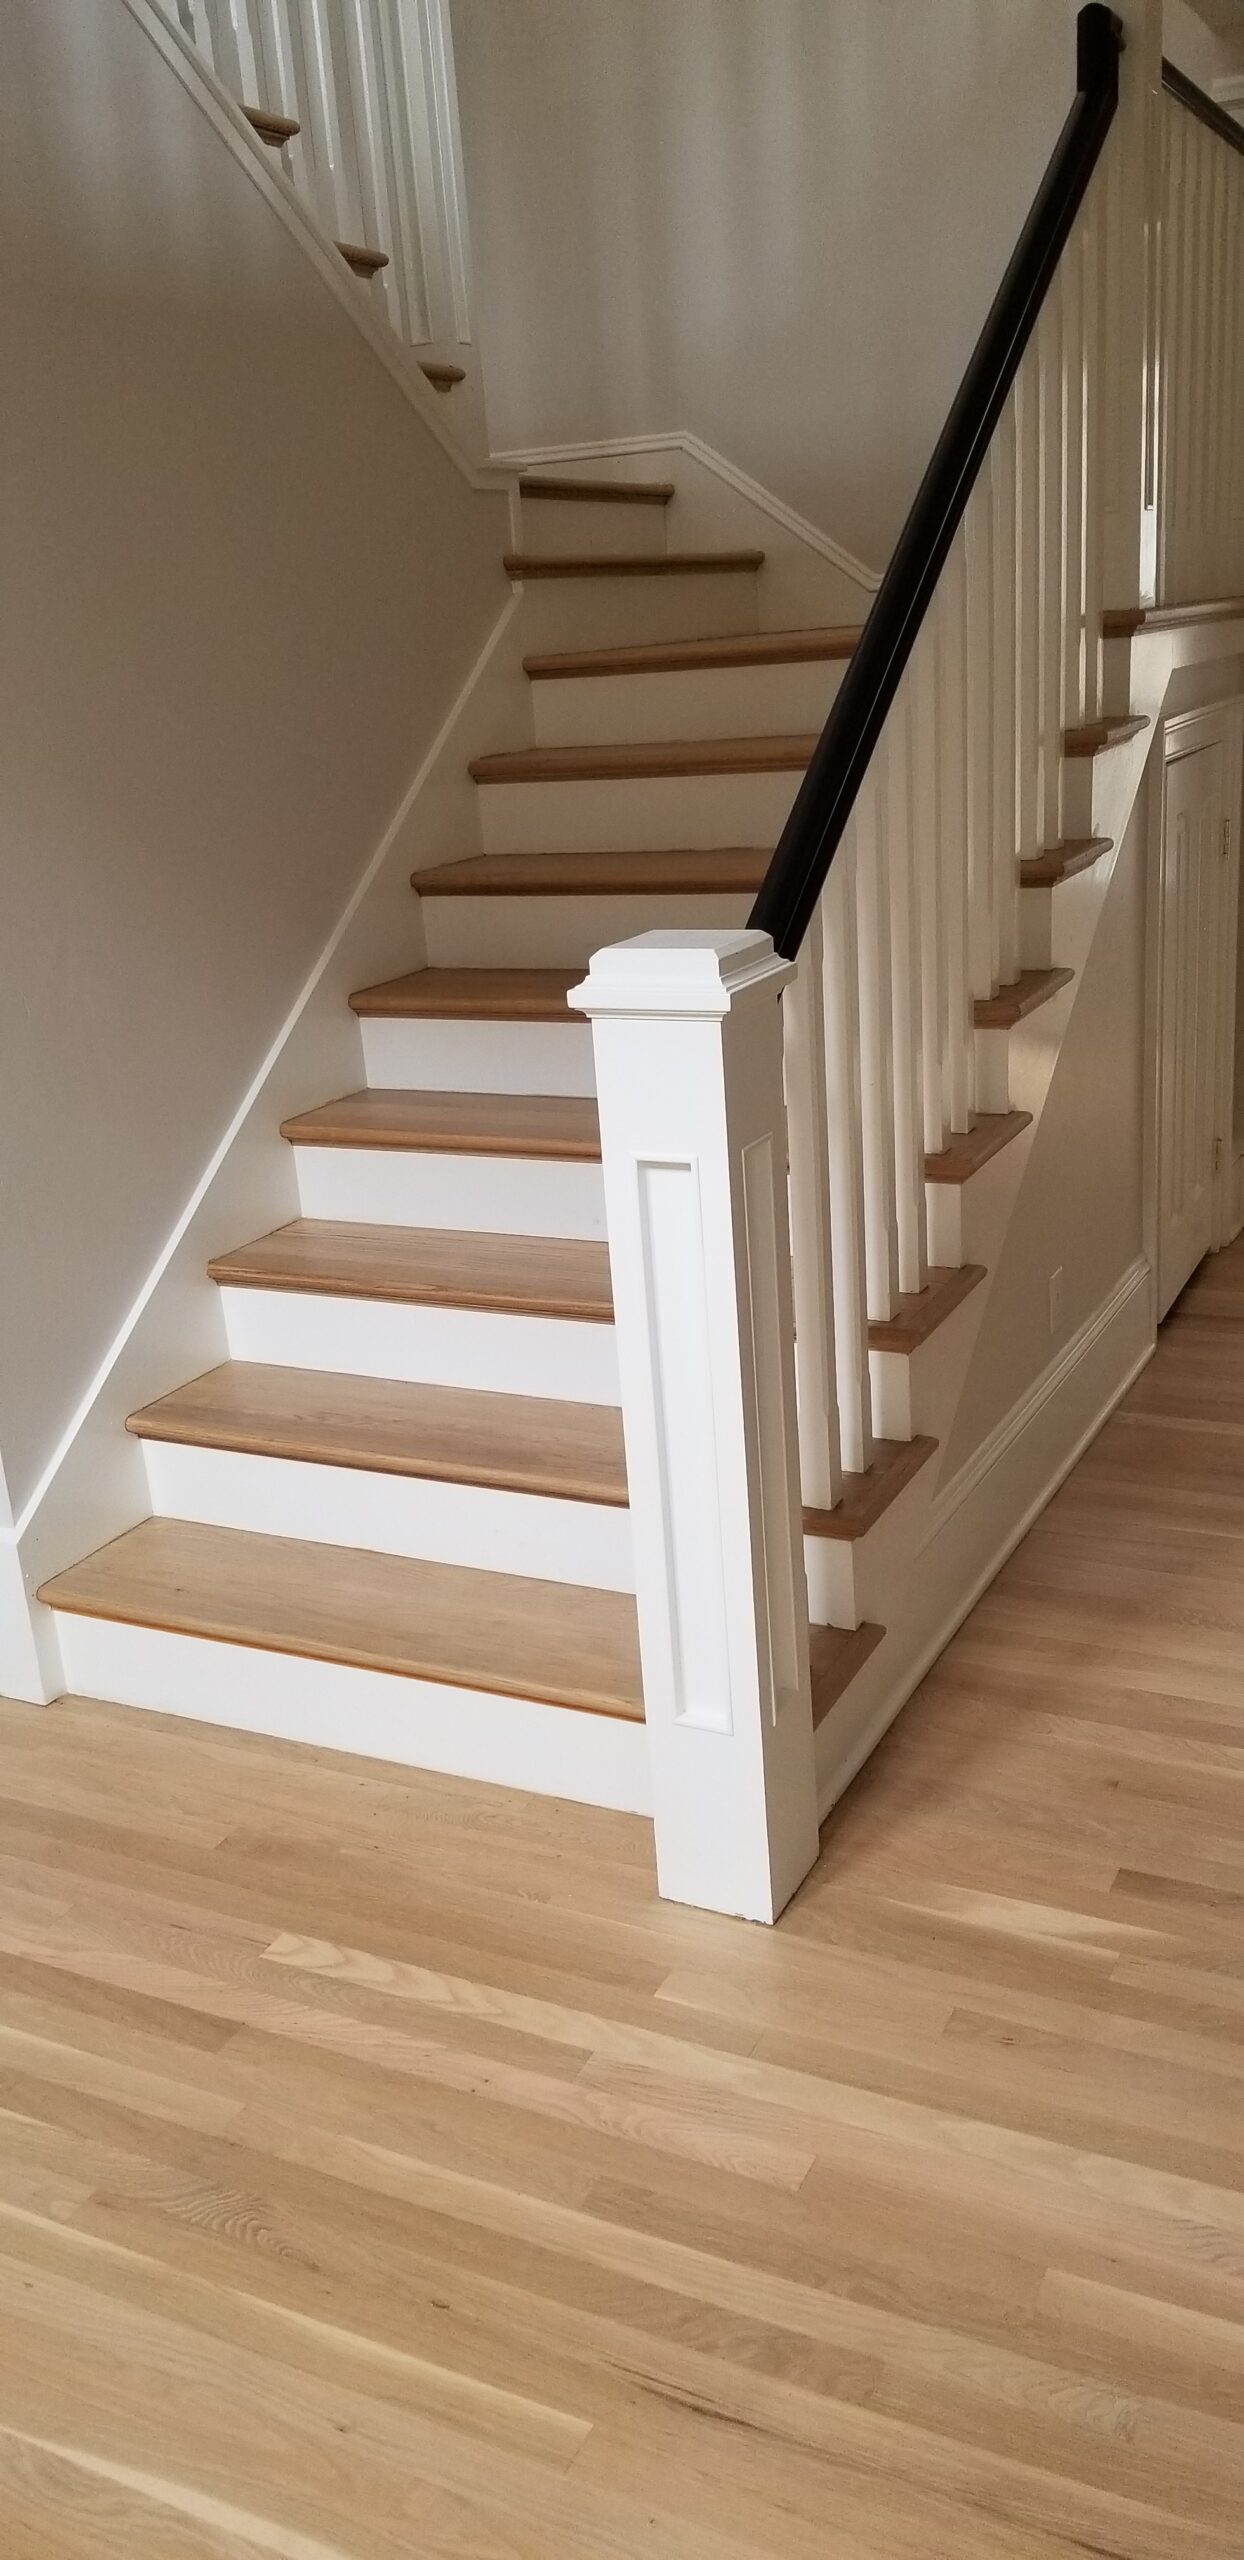 Home Entryway Stairs Hardwood Flooring, How To Do Hardwood Floors On Stairs